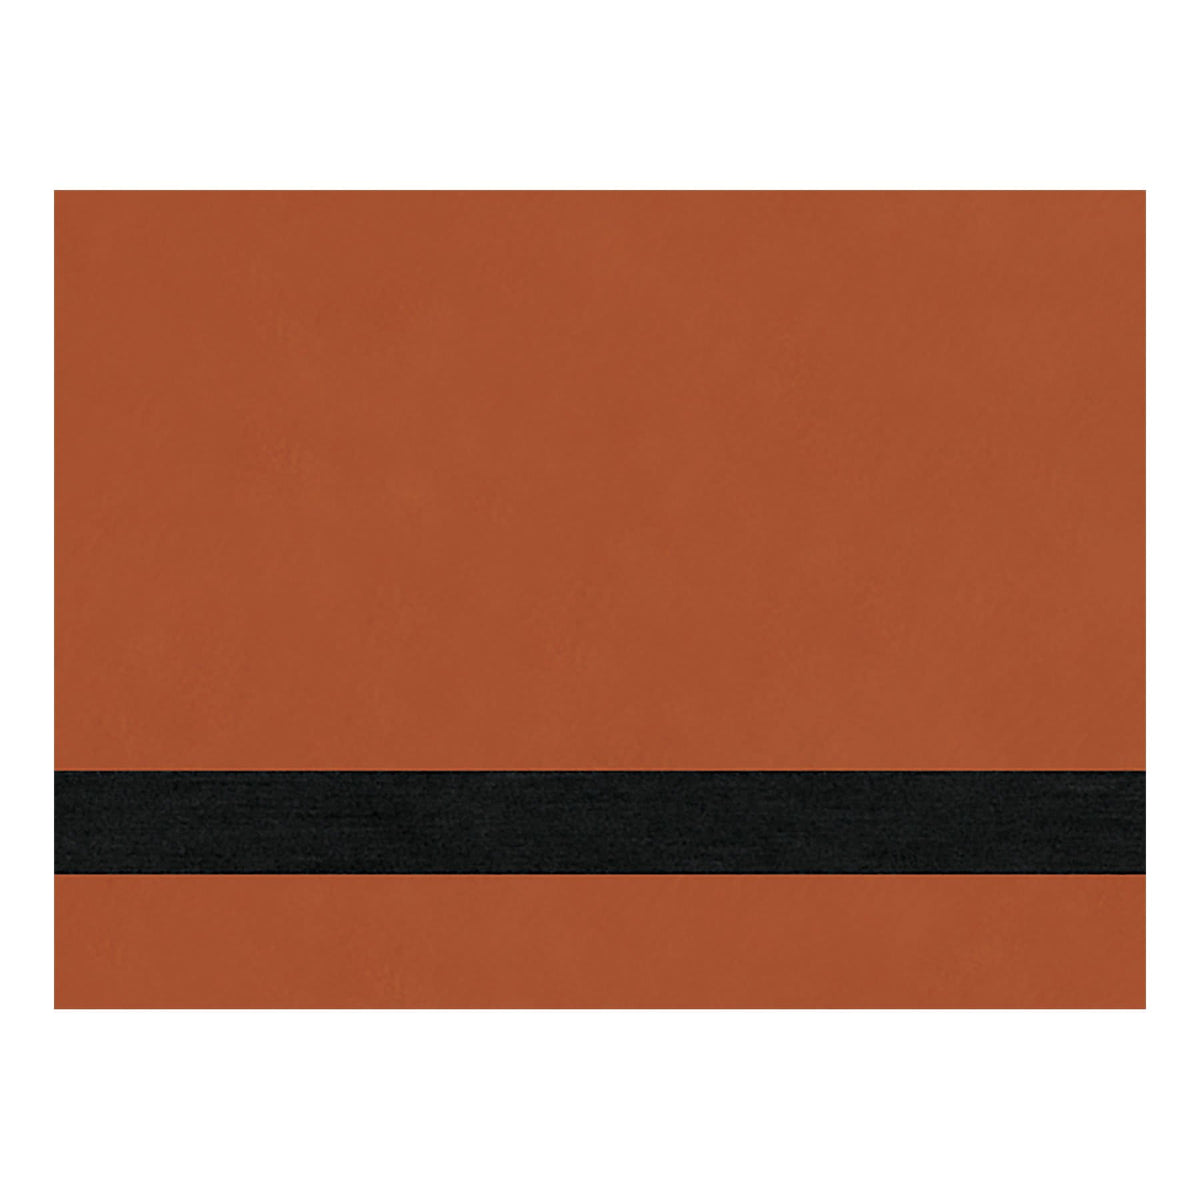 MULTI PACK OF HYDBOND LEATHERETTE SHEETS (12x24)